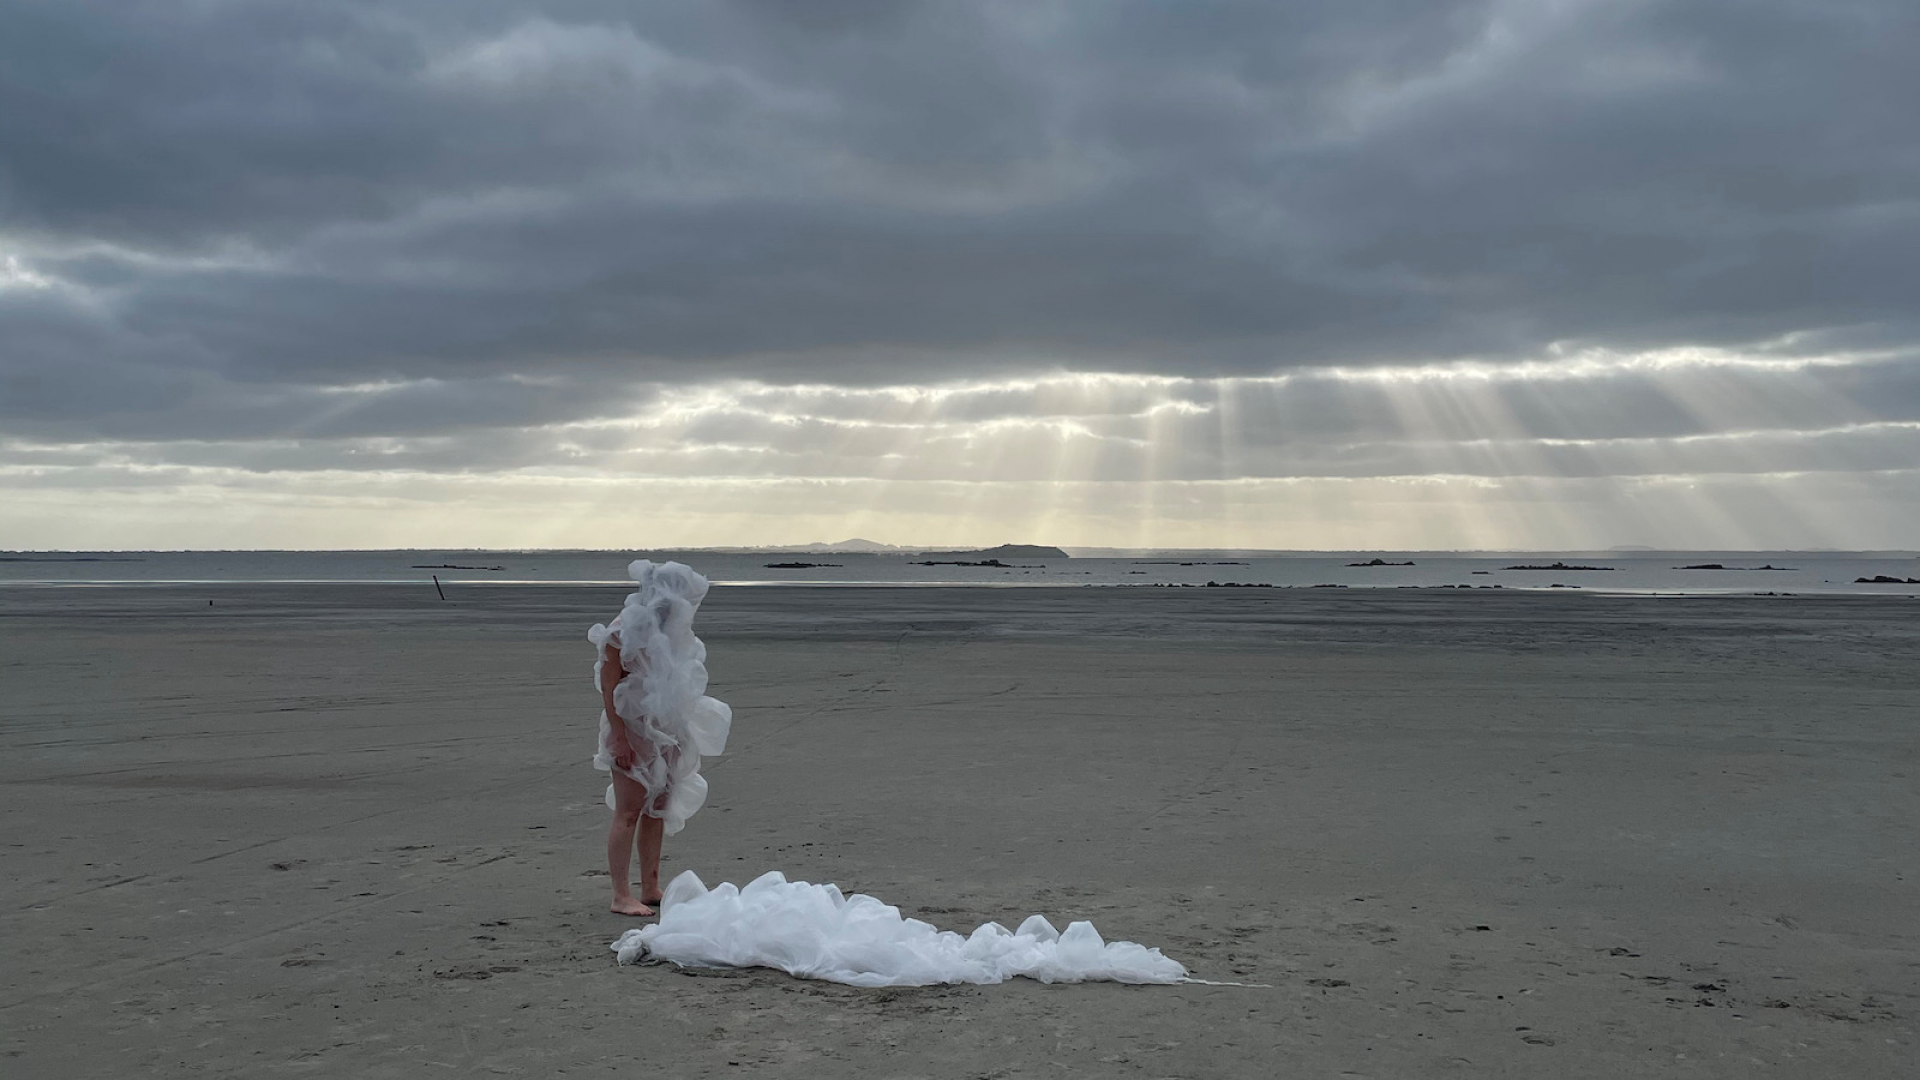 Image of performance artist and sculpture on a salt lake